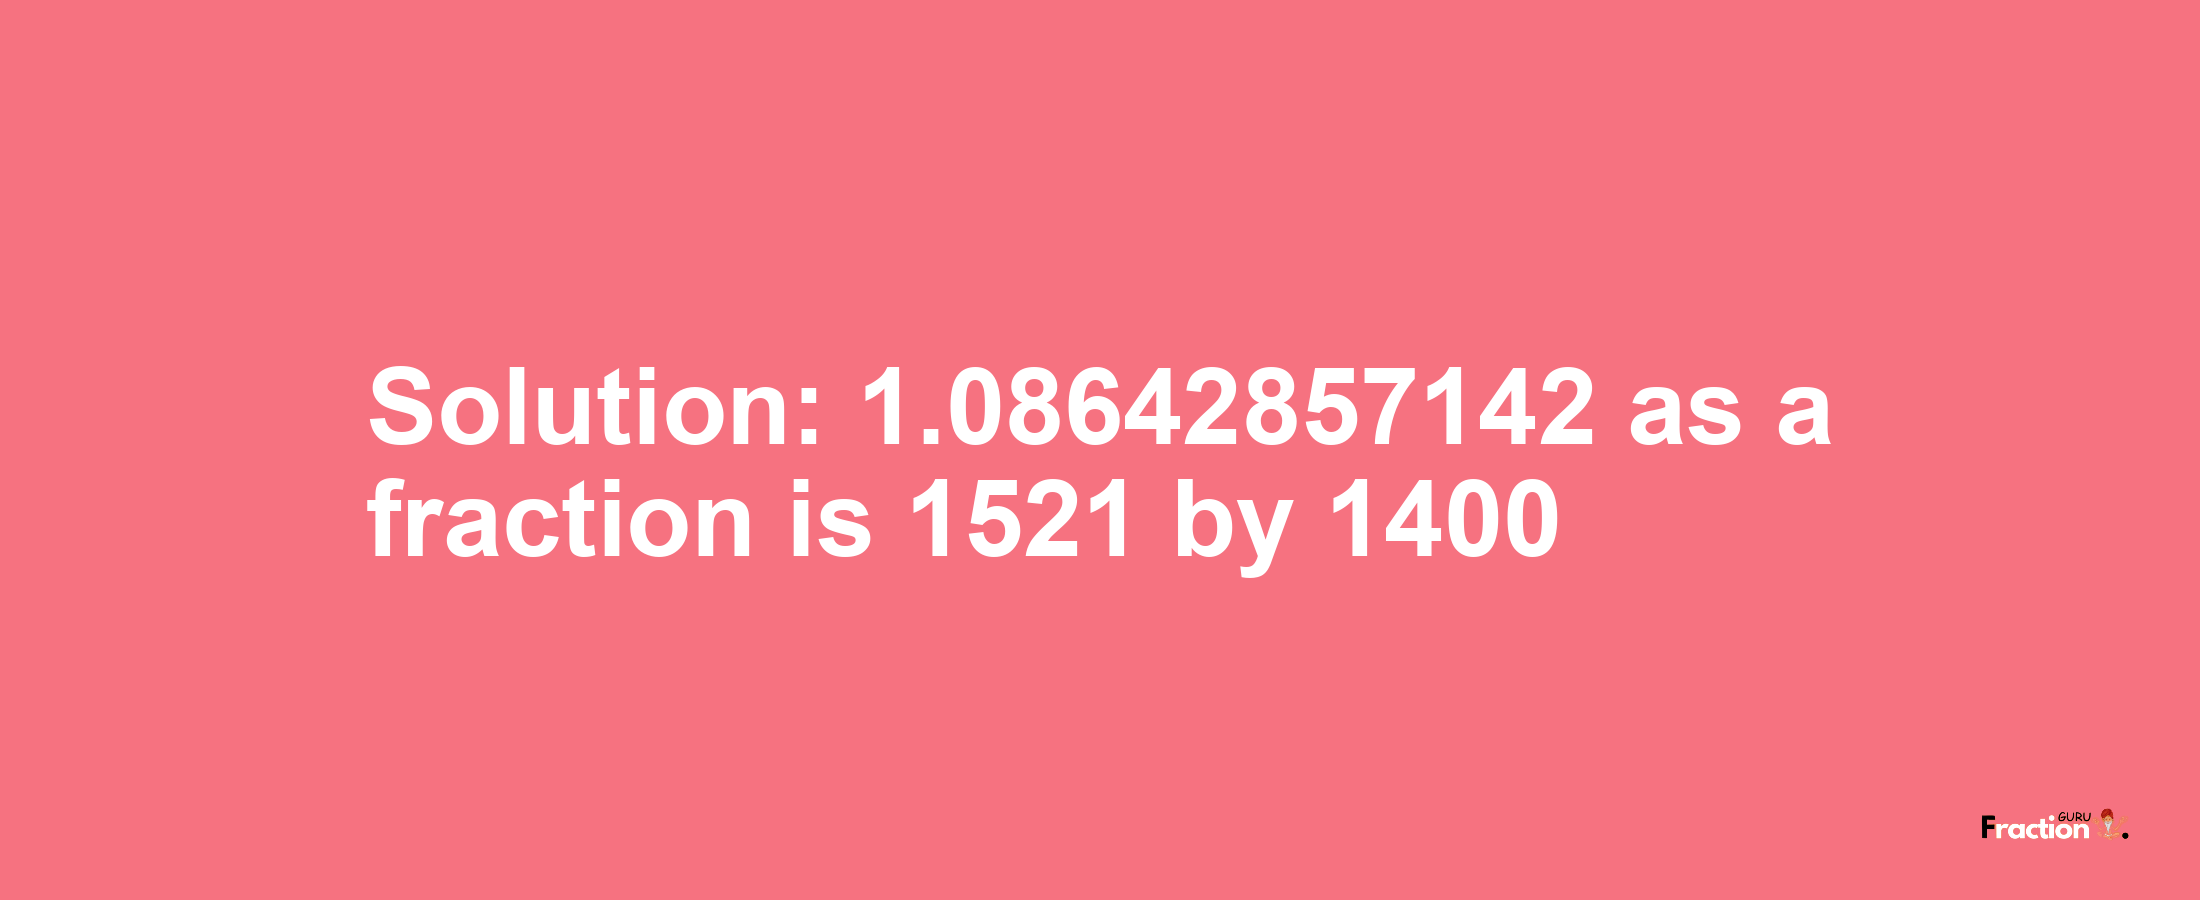 Solution:1.08642857142 as a fraction is 1521/1400